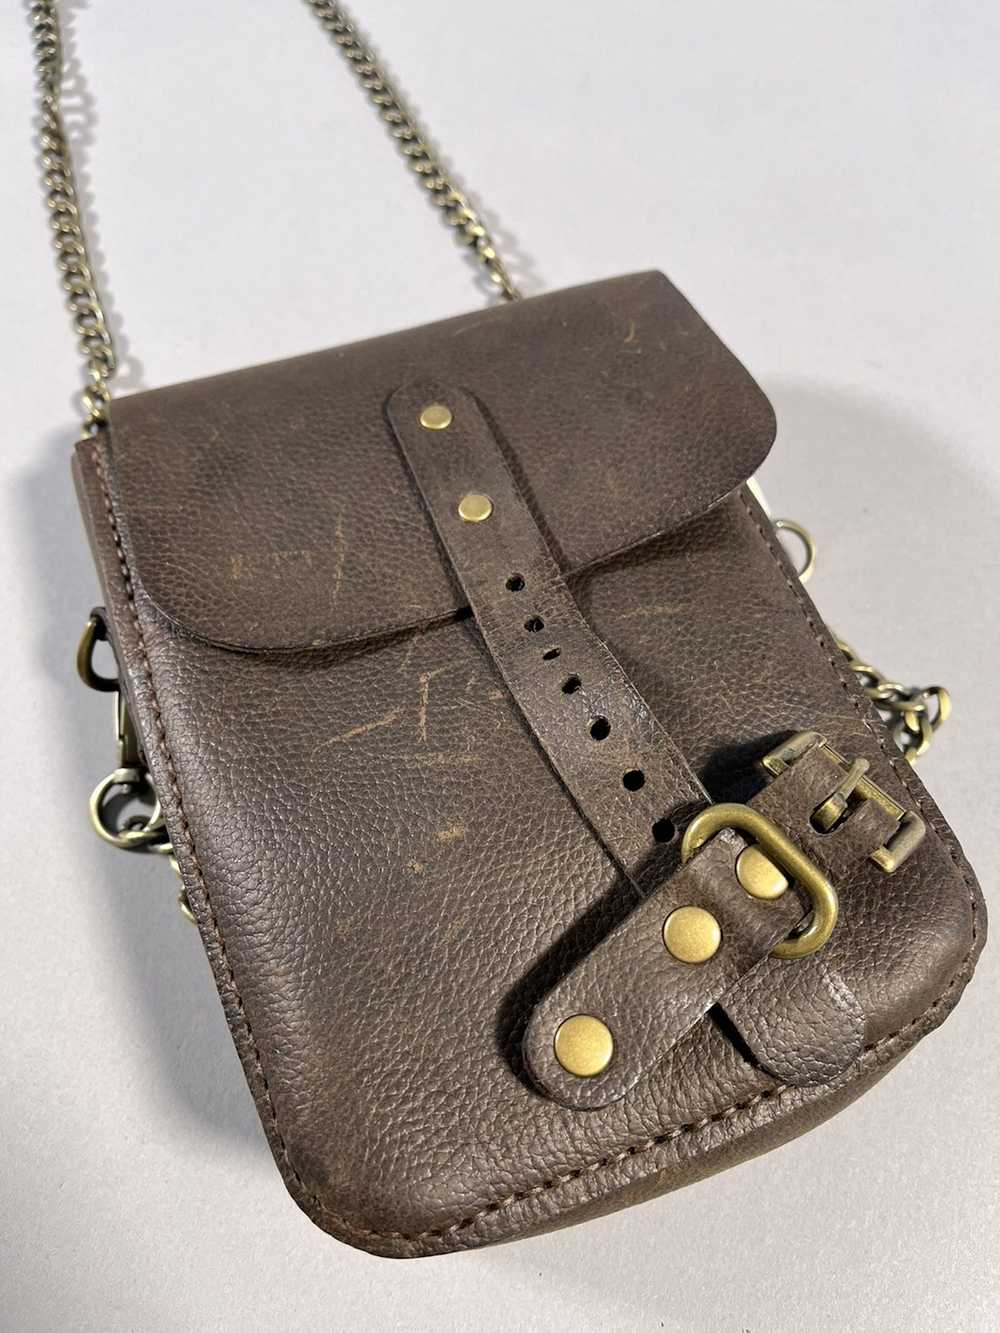 Leather × Vintage Vintage Leather Bag with Chain - image 4